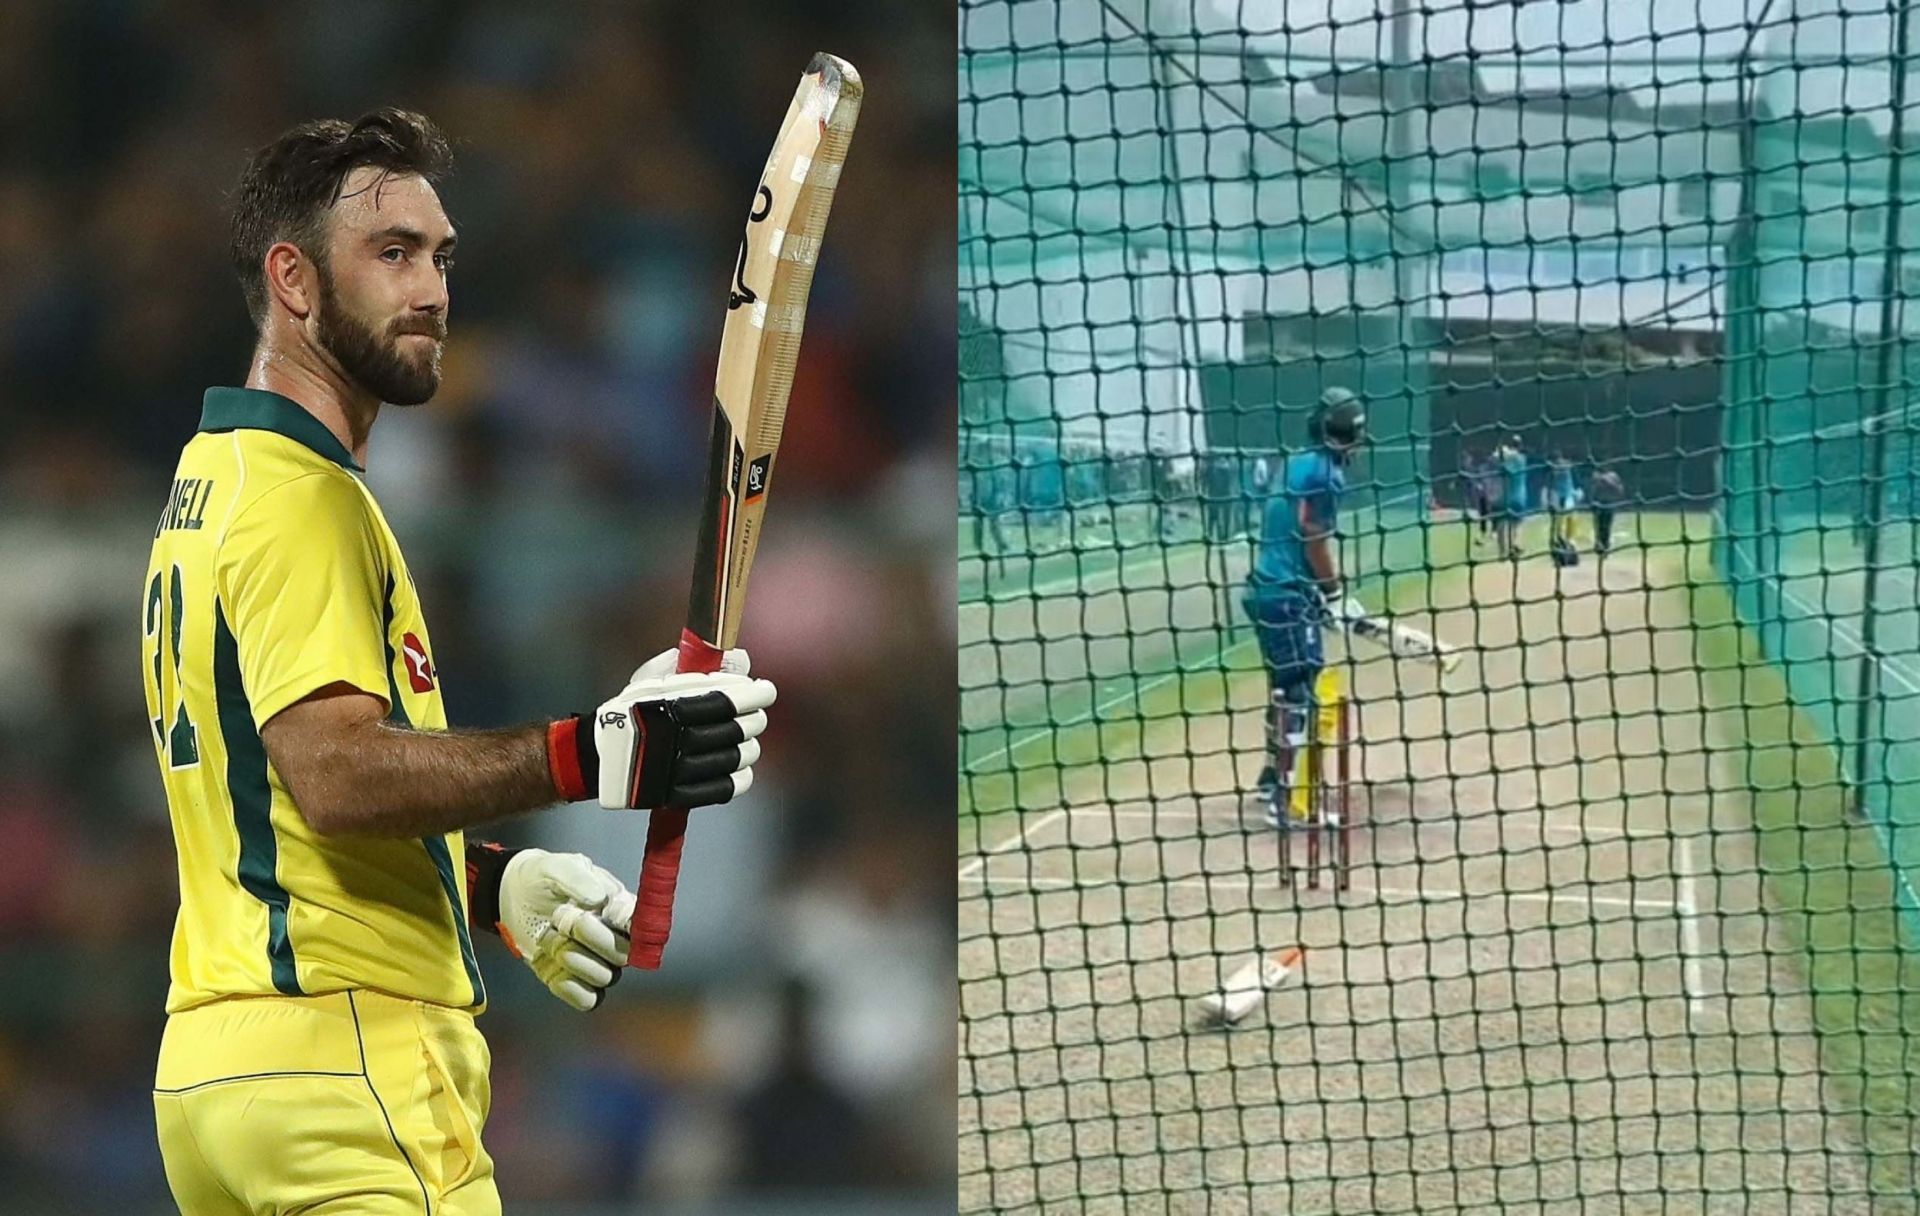 Glenn Maxwell practicing intensely ahead of 3rd ODI vs India. 